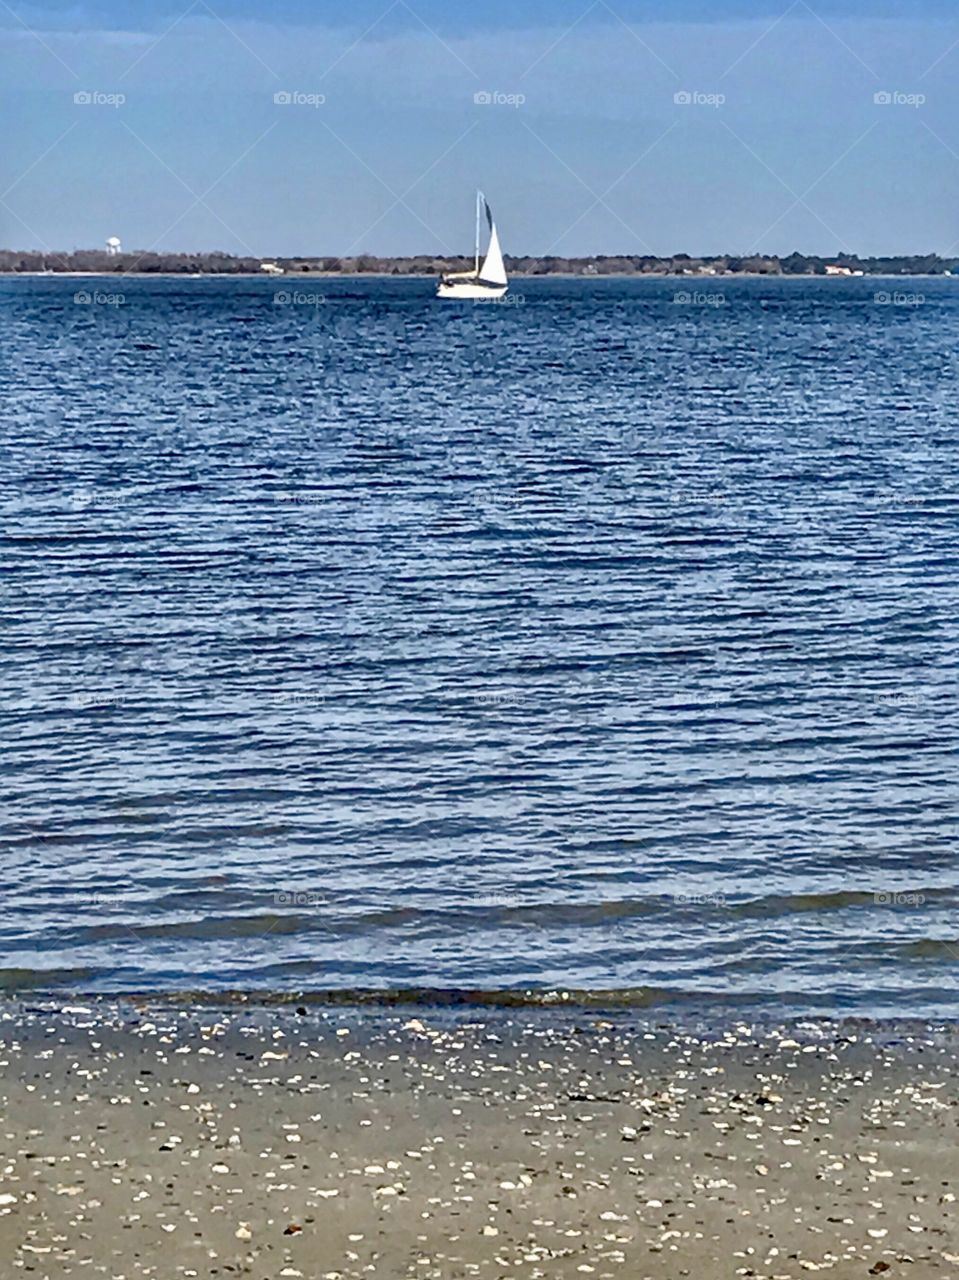 Sailboat in the Harbor